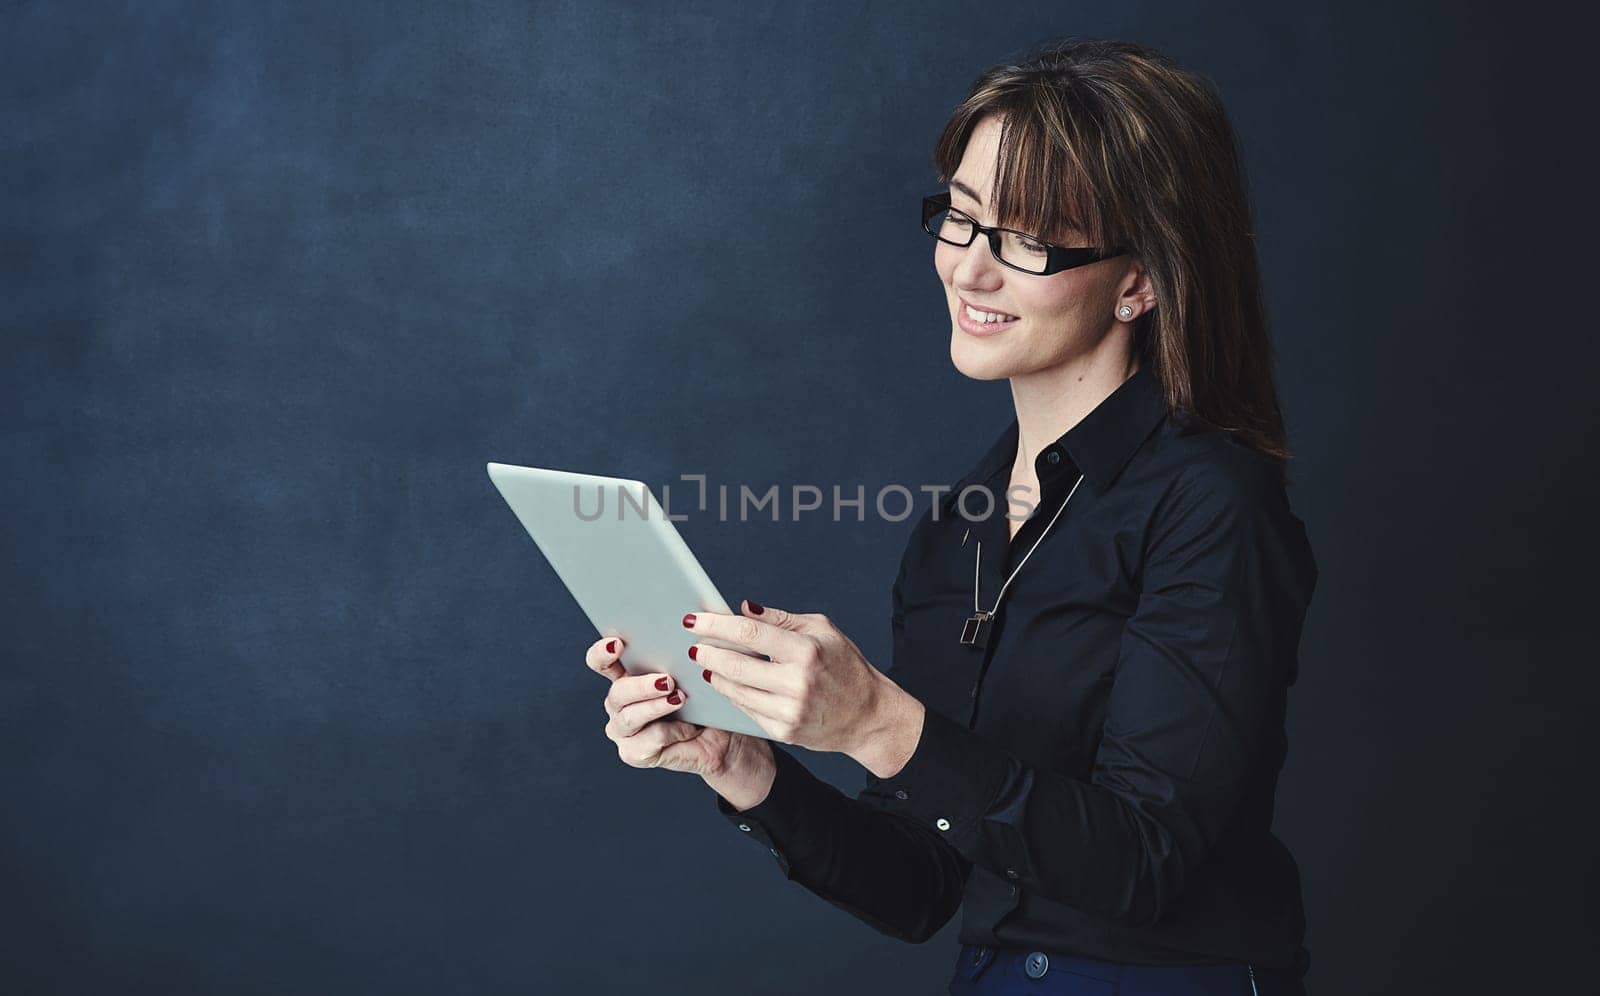 Organising her plans for success the smart way. Studio portrait of a corporate businesswoman using a digital tablet against a dark background. by YuriArcurs